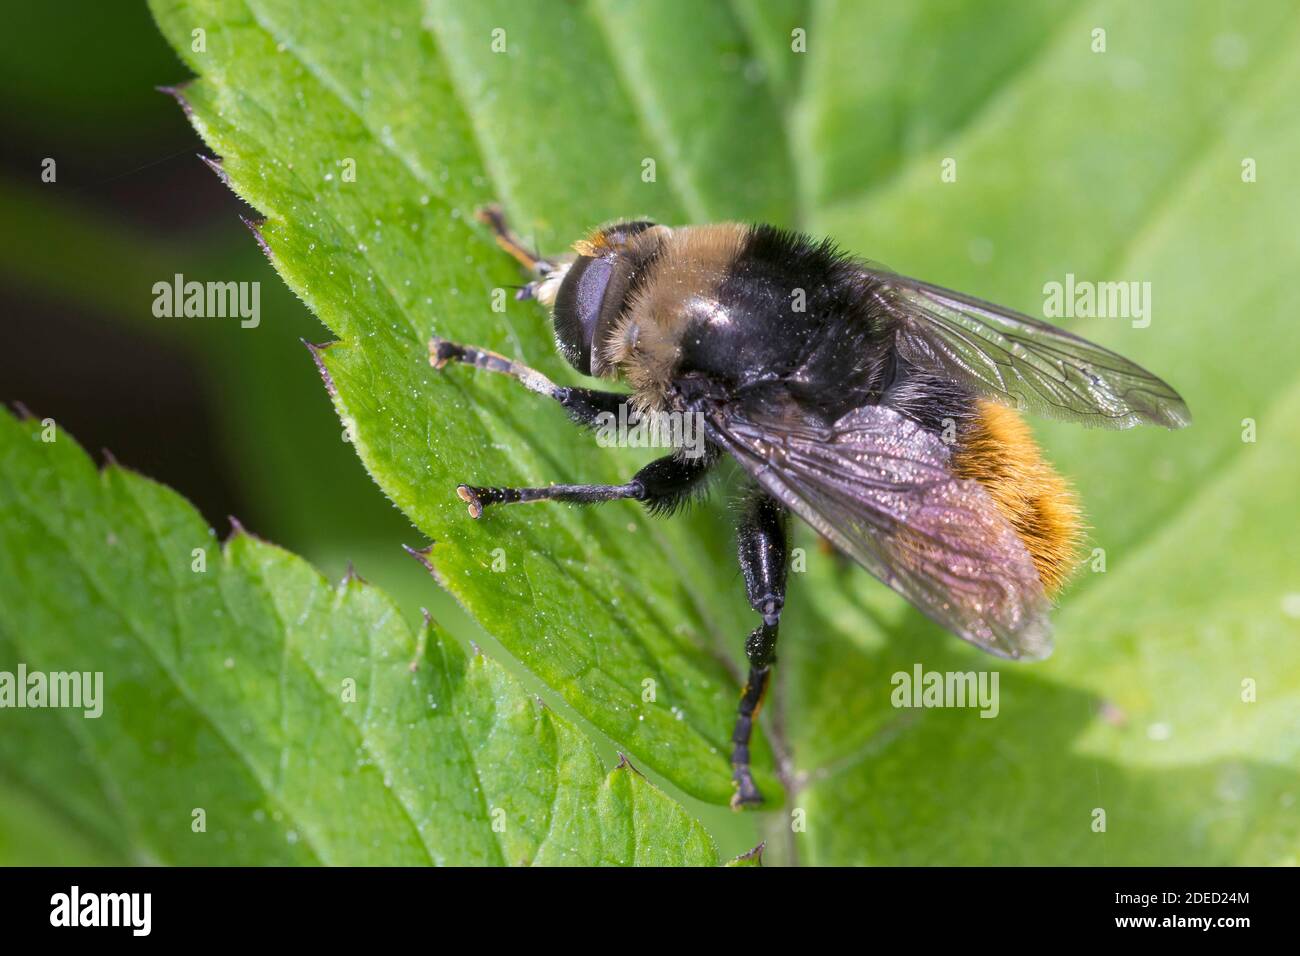 Large narcissus fly, Large bulb fly, Narcissus bulb fly (Merodon equestris), bumble bee mimicry on a leaf, Germany Stock Photo